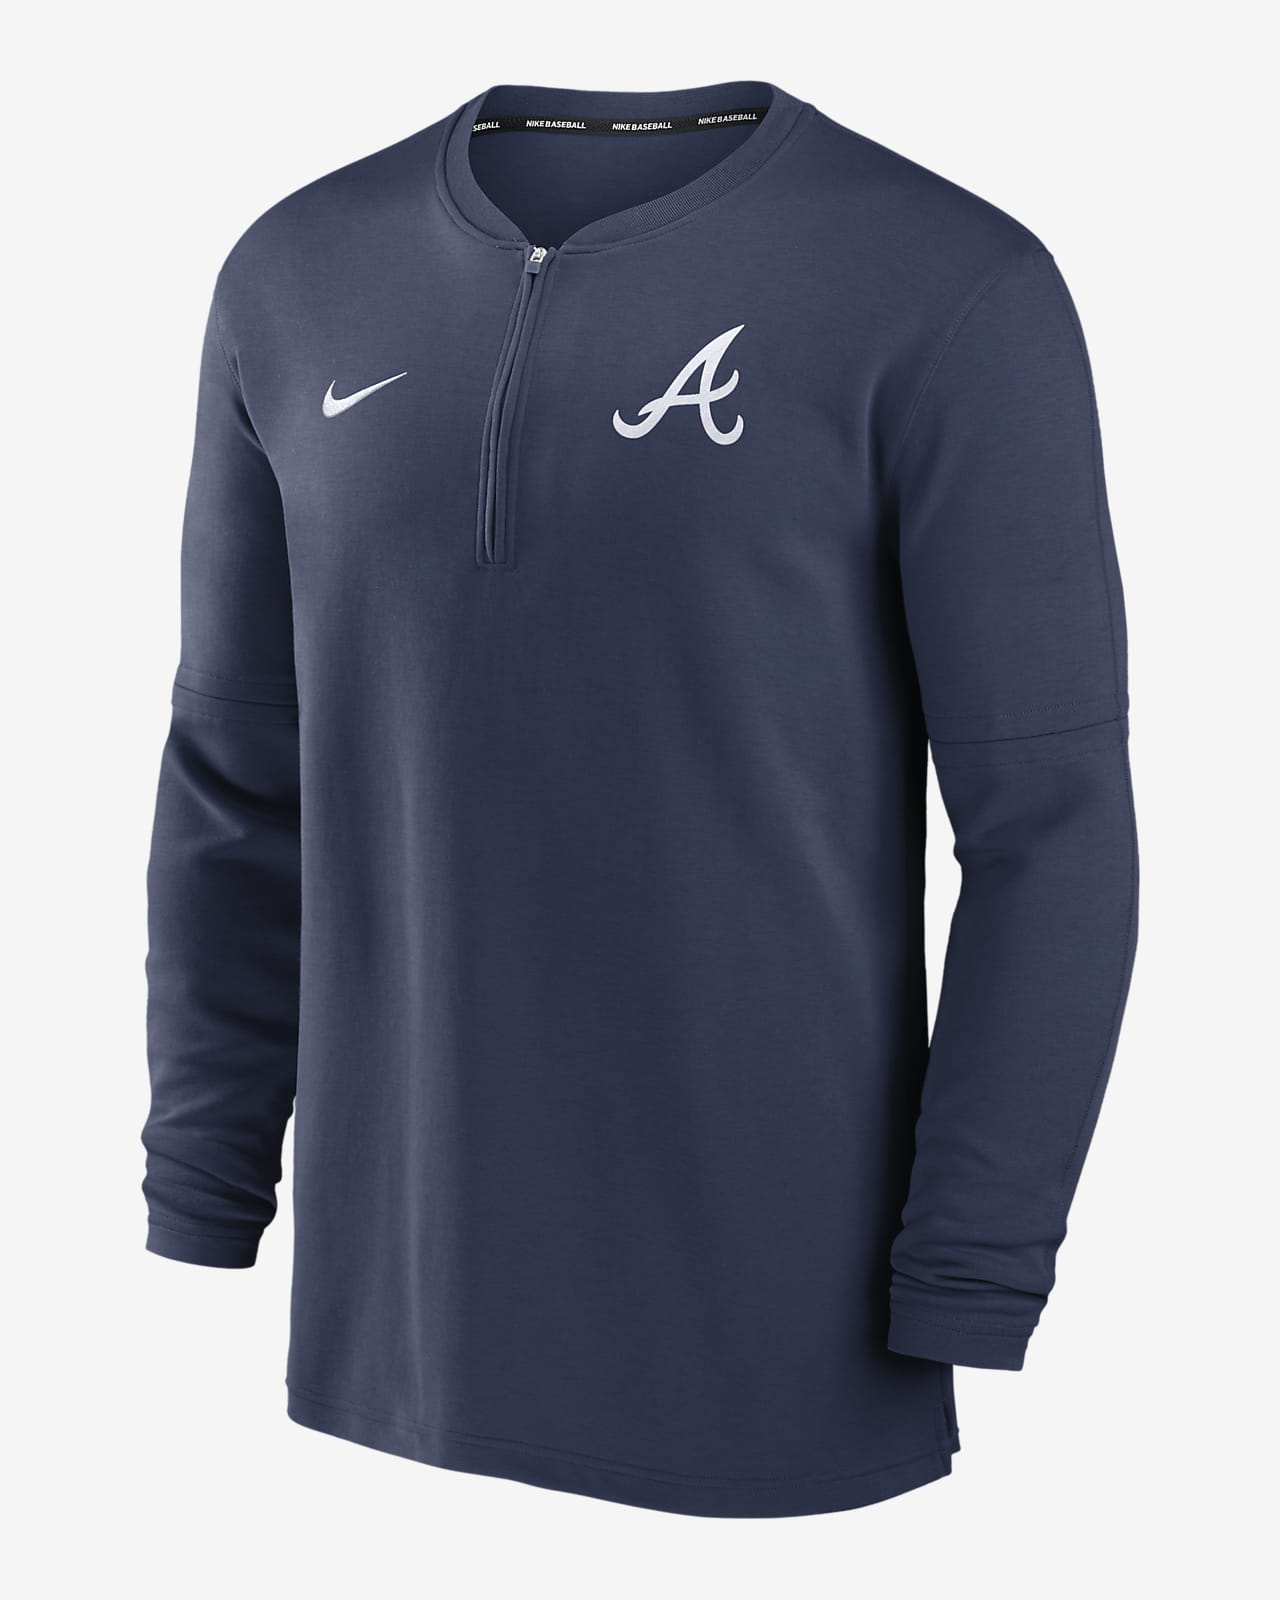 Atlanta Braves Authentic Collection Game Time Men's Nike Dri-FIT MLB 1/2-Zip Long-Sleeve Top